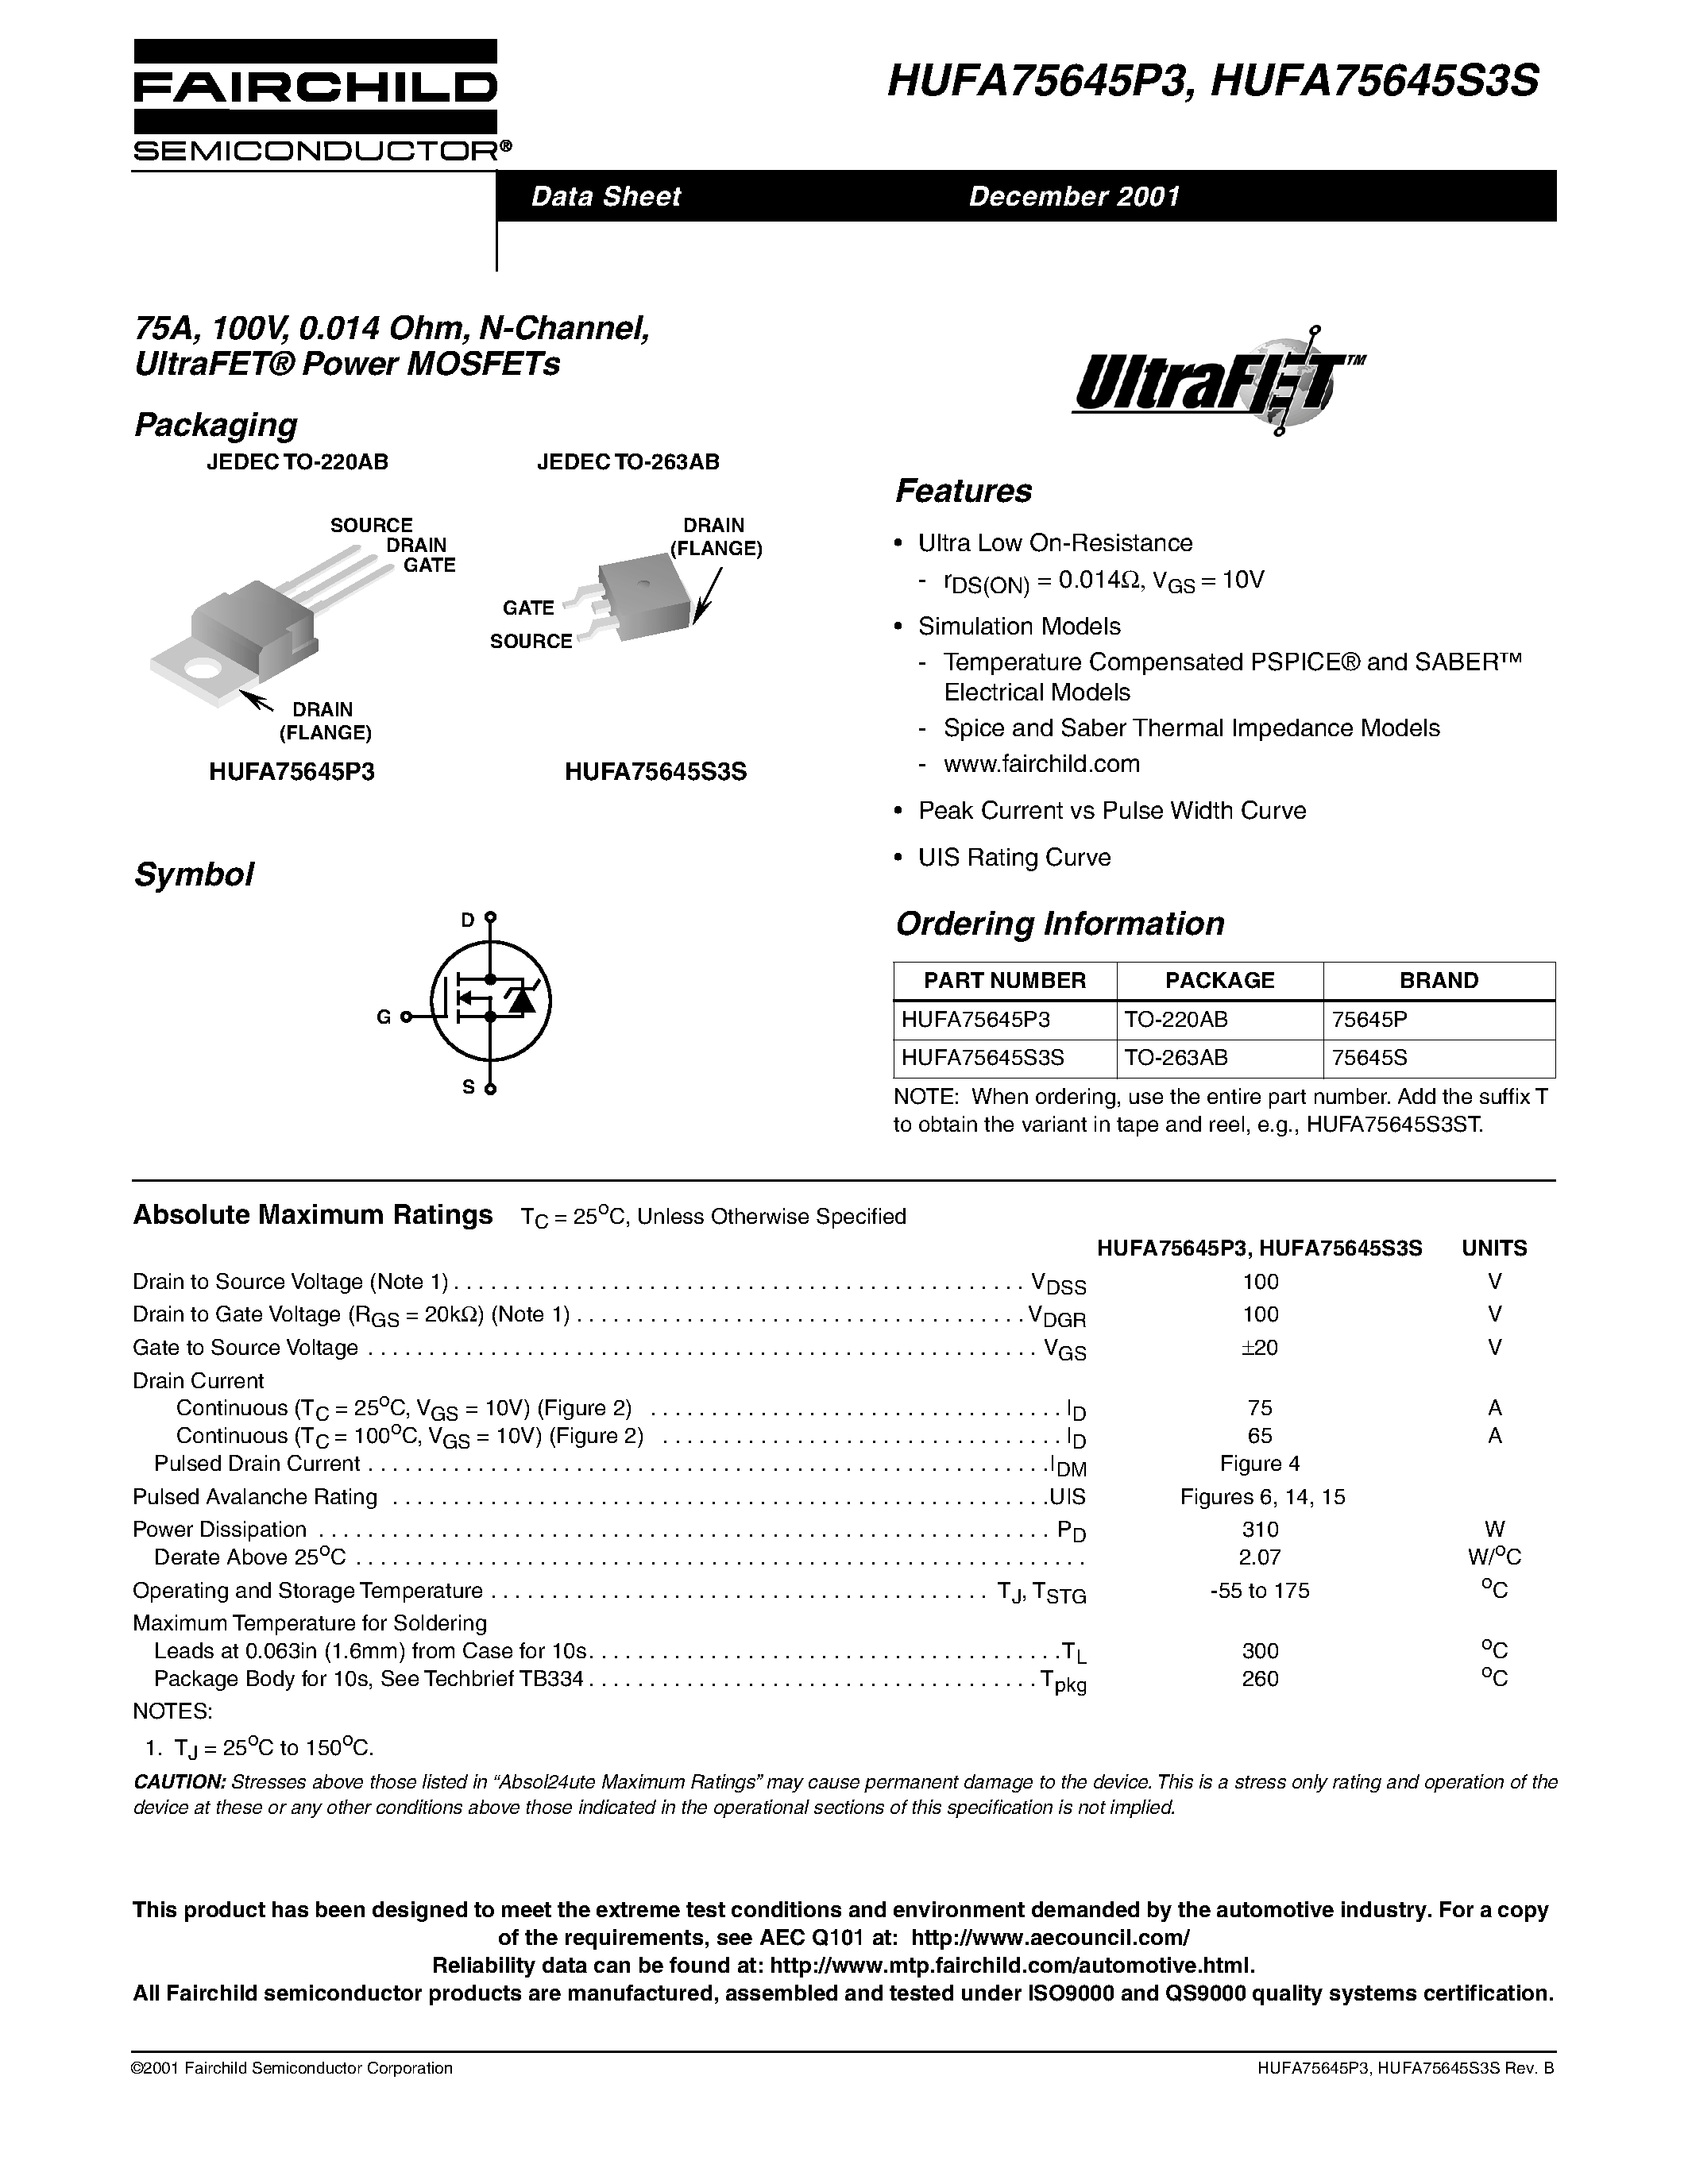 Datasheet HUFA75645S3S - 75A/ 100V/ 0.014 Ohm/ N-Channel/ UltraFET Power MOSFETs page 1